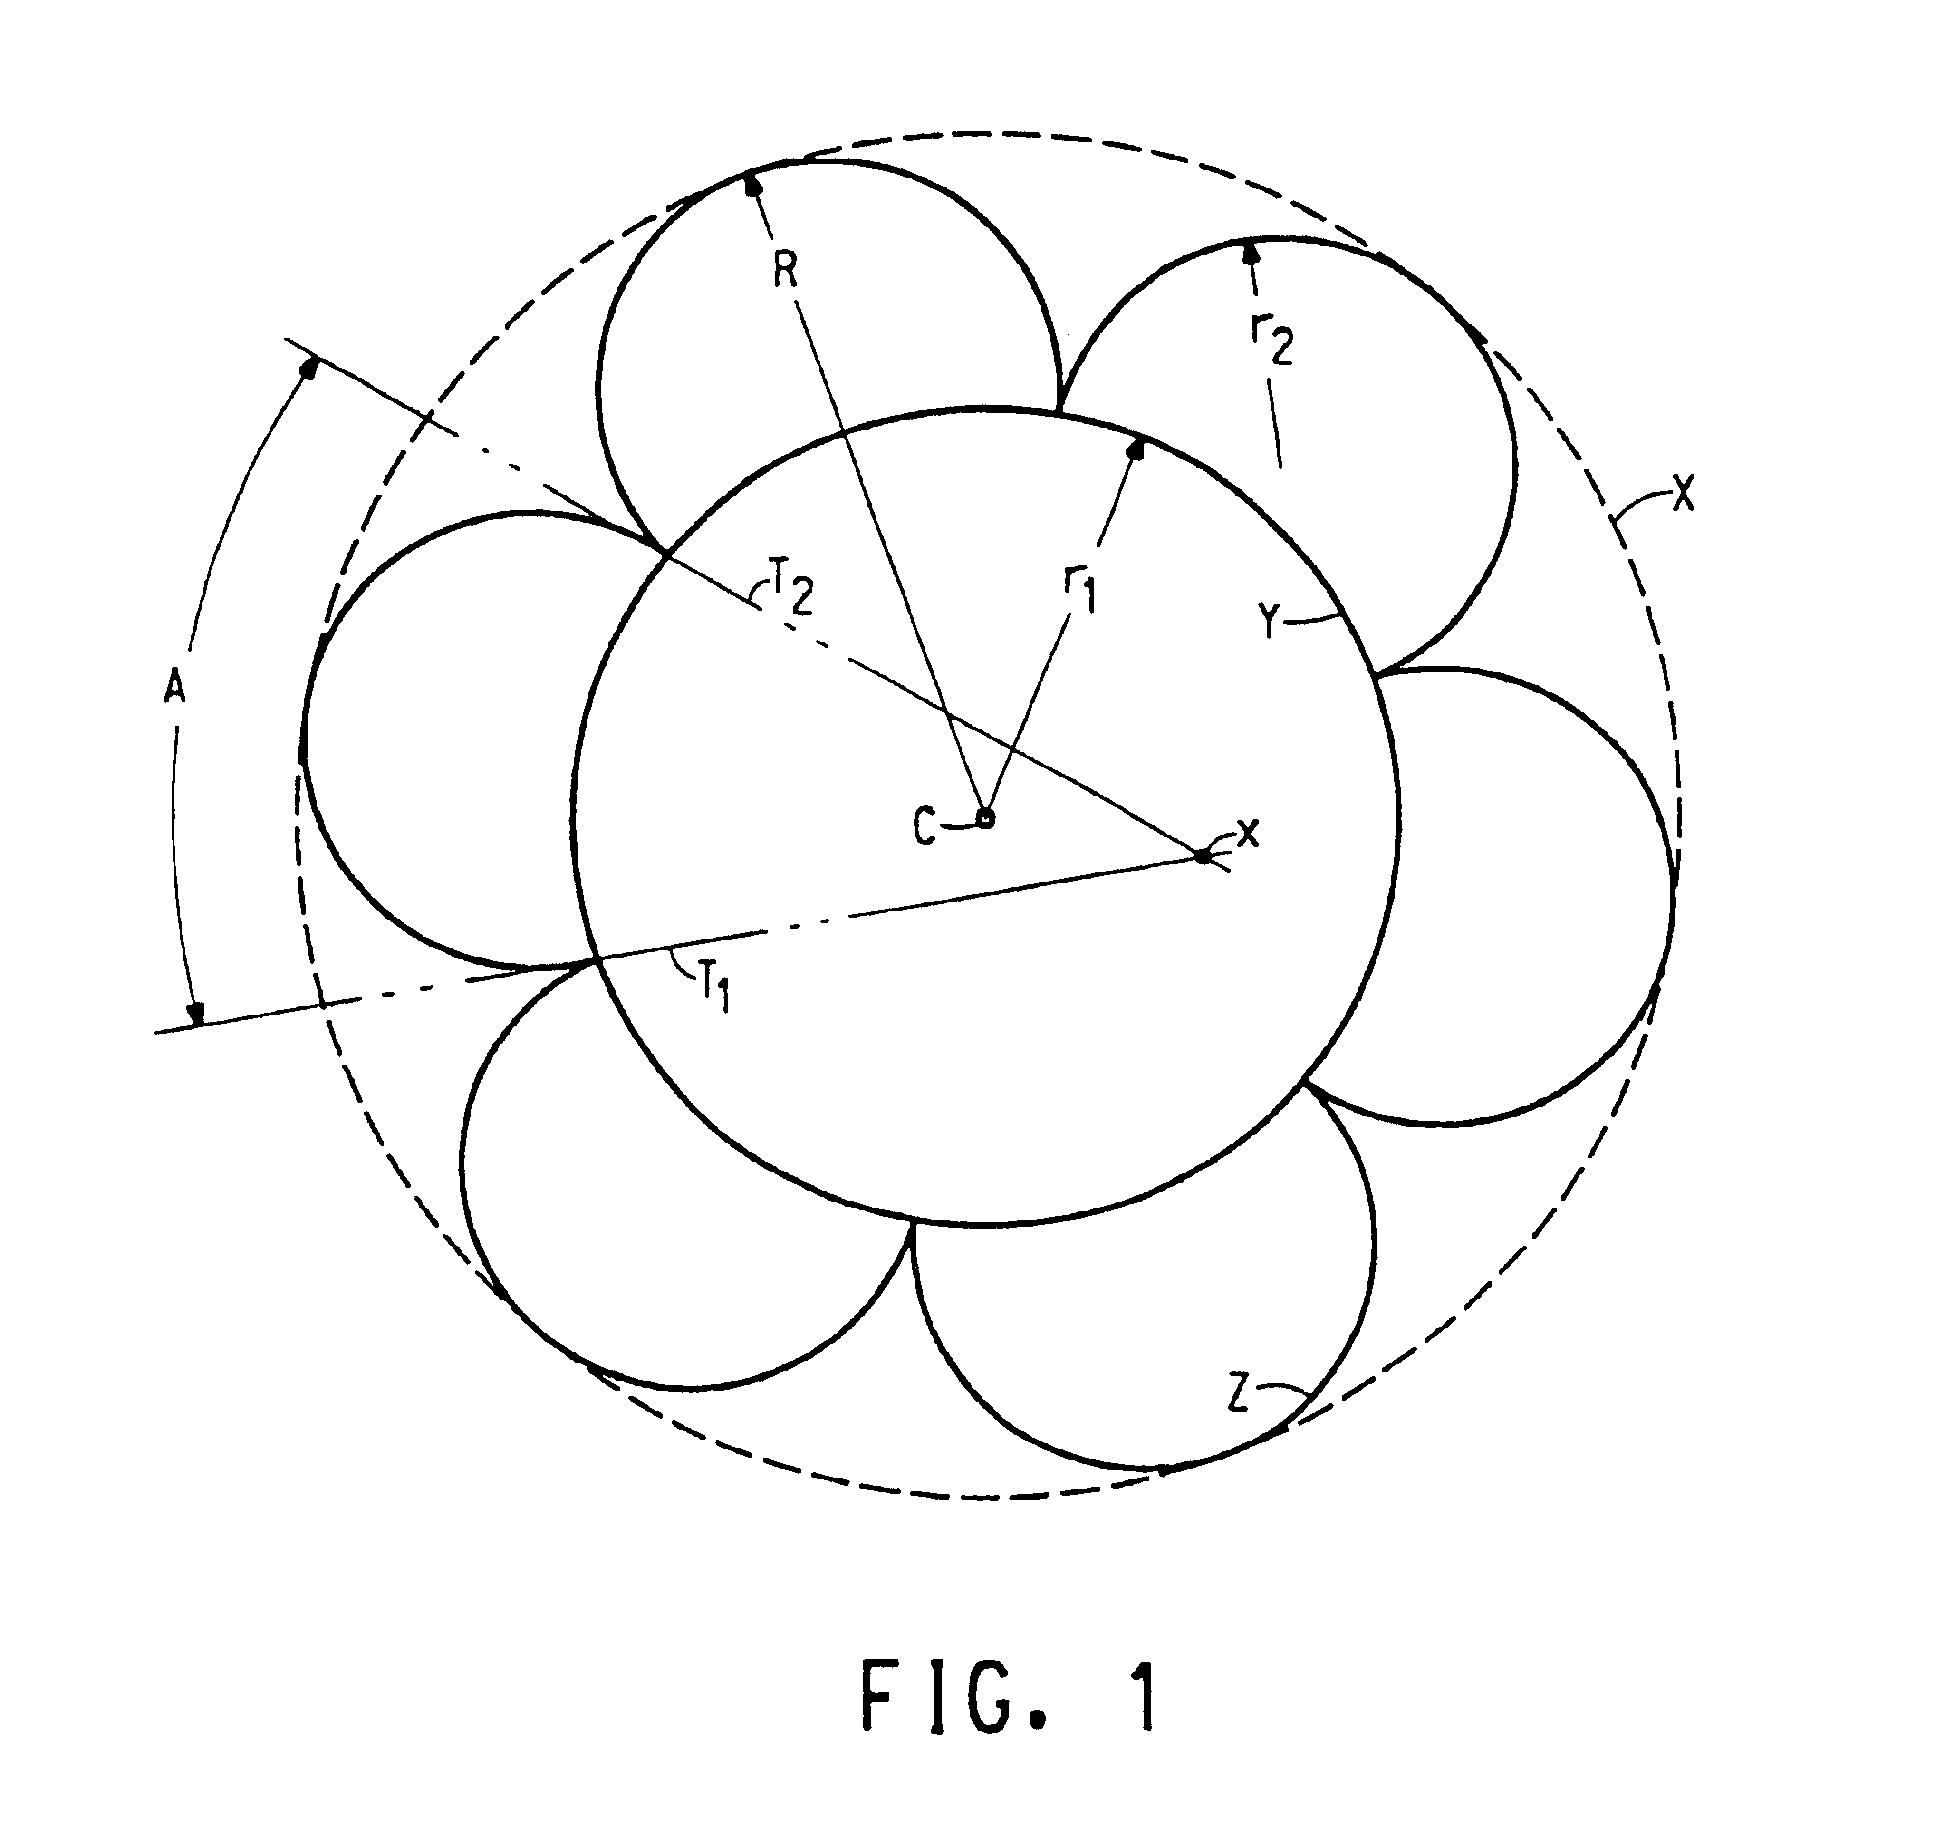 Multilobal polymer filaments and articles produced therefrom